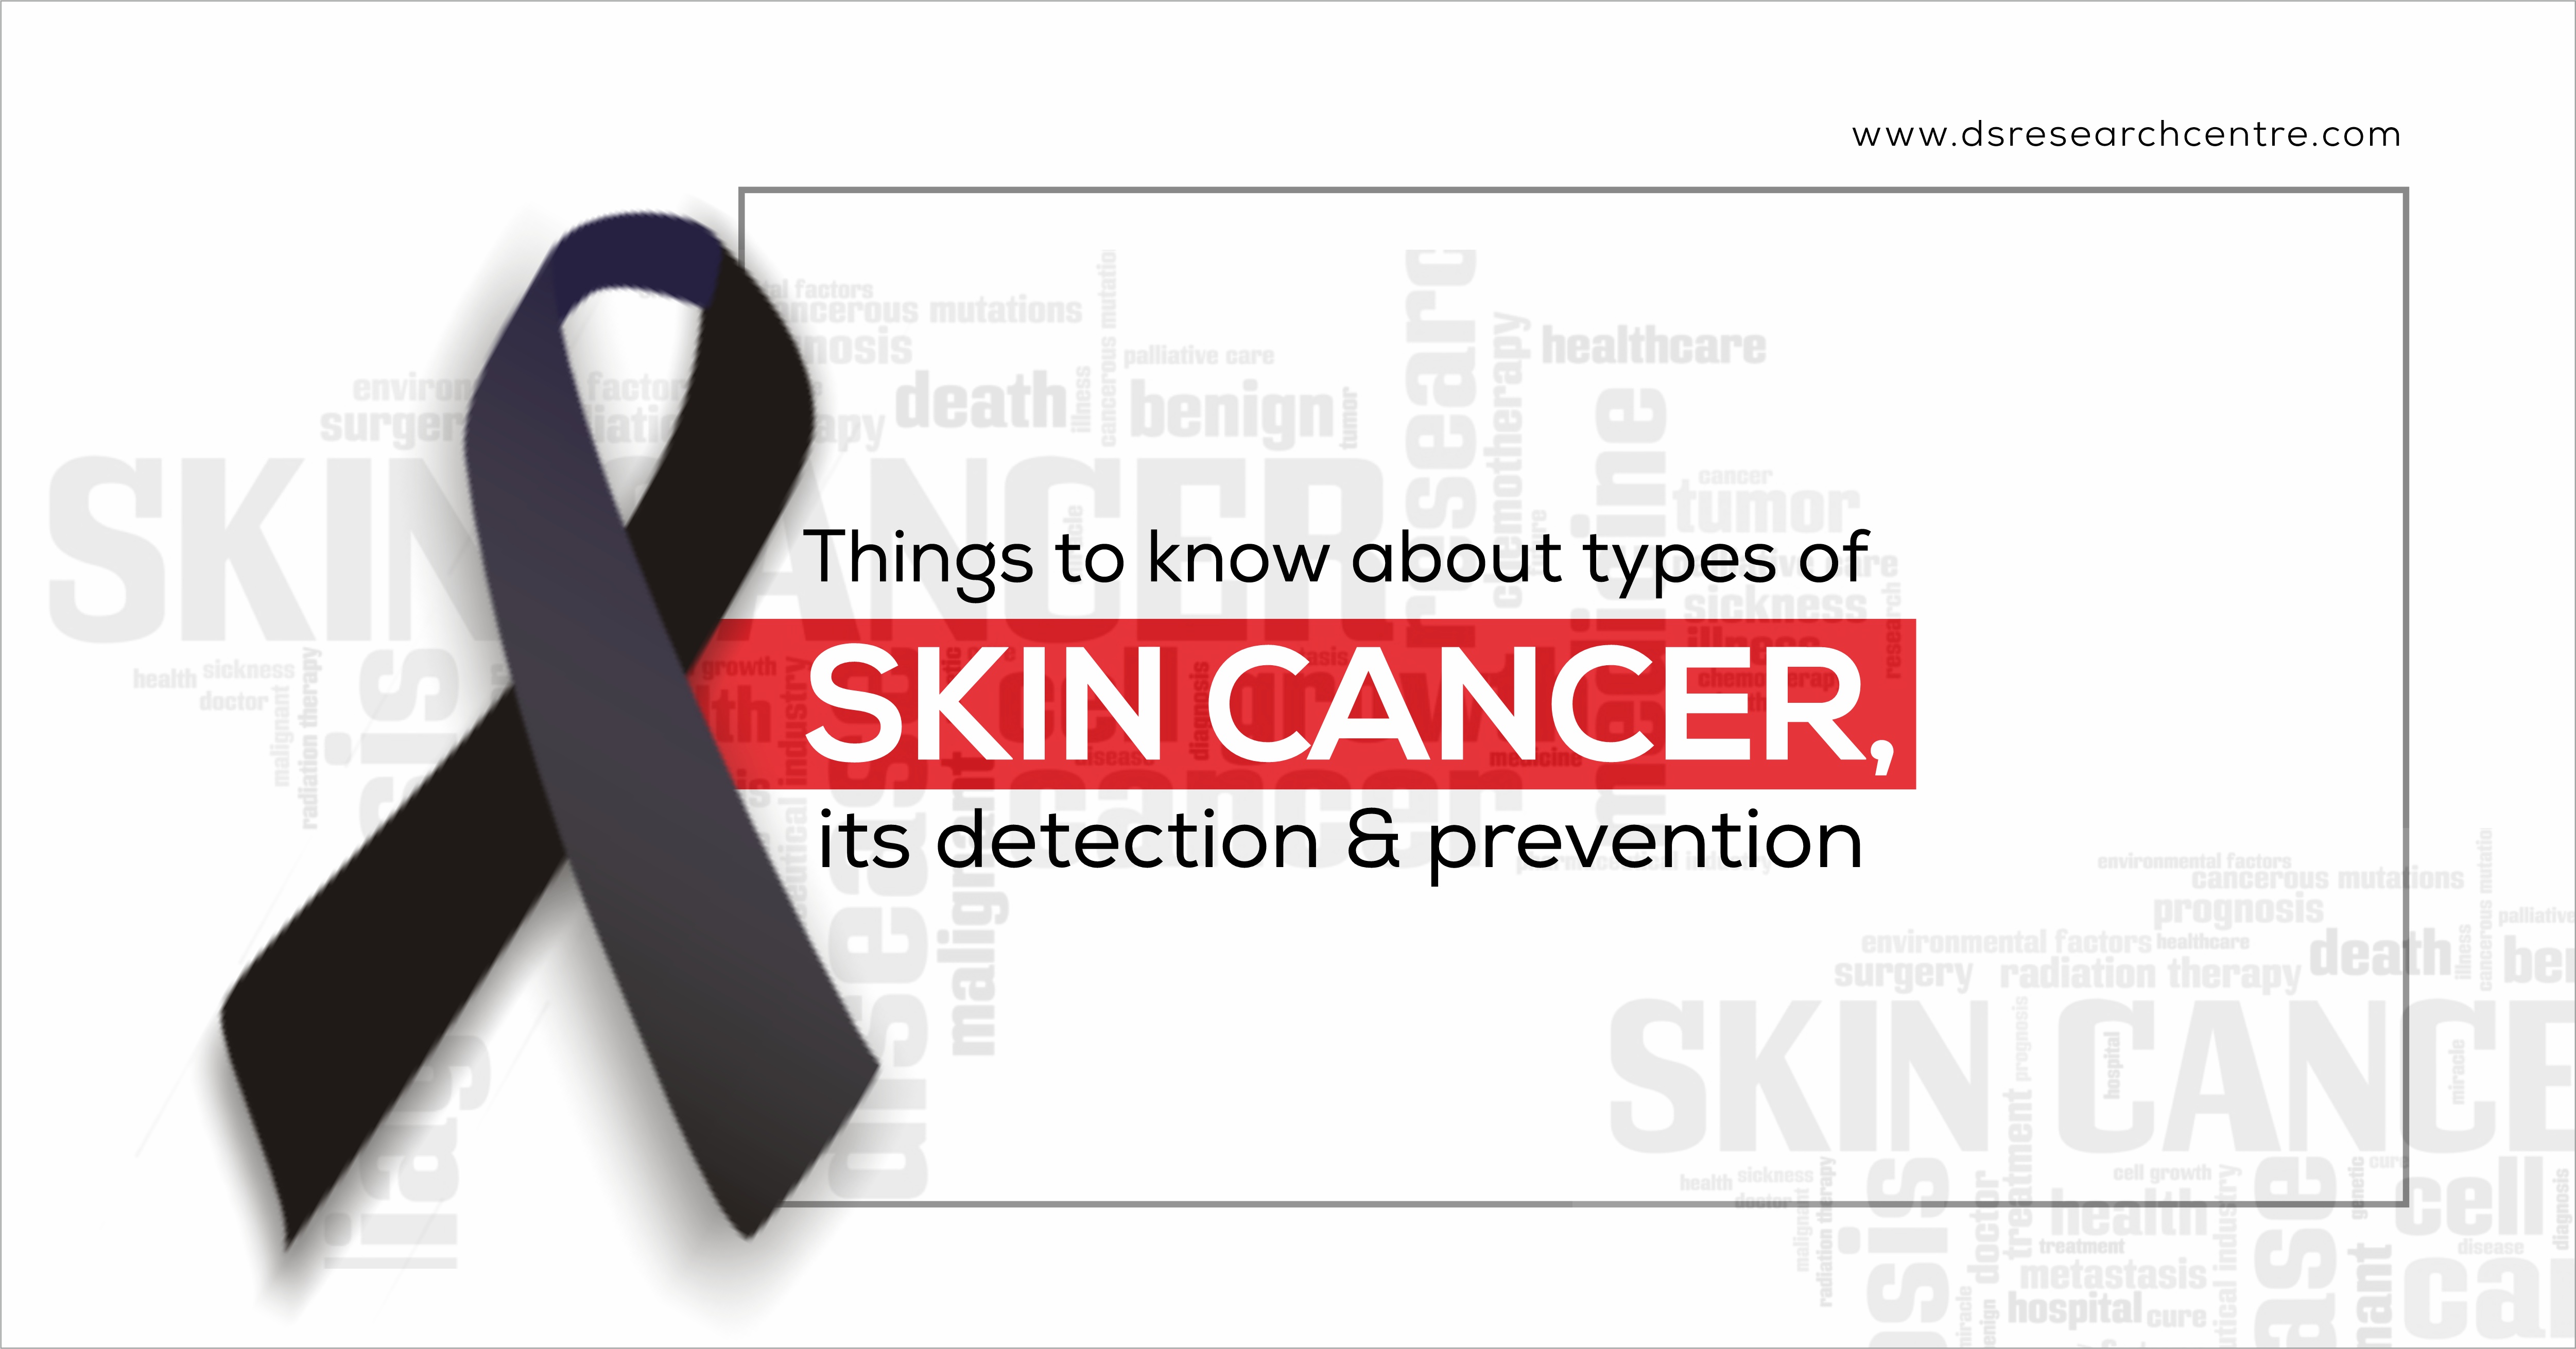 Things to know about types of Skin Cancer, its detection & prevention